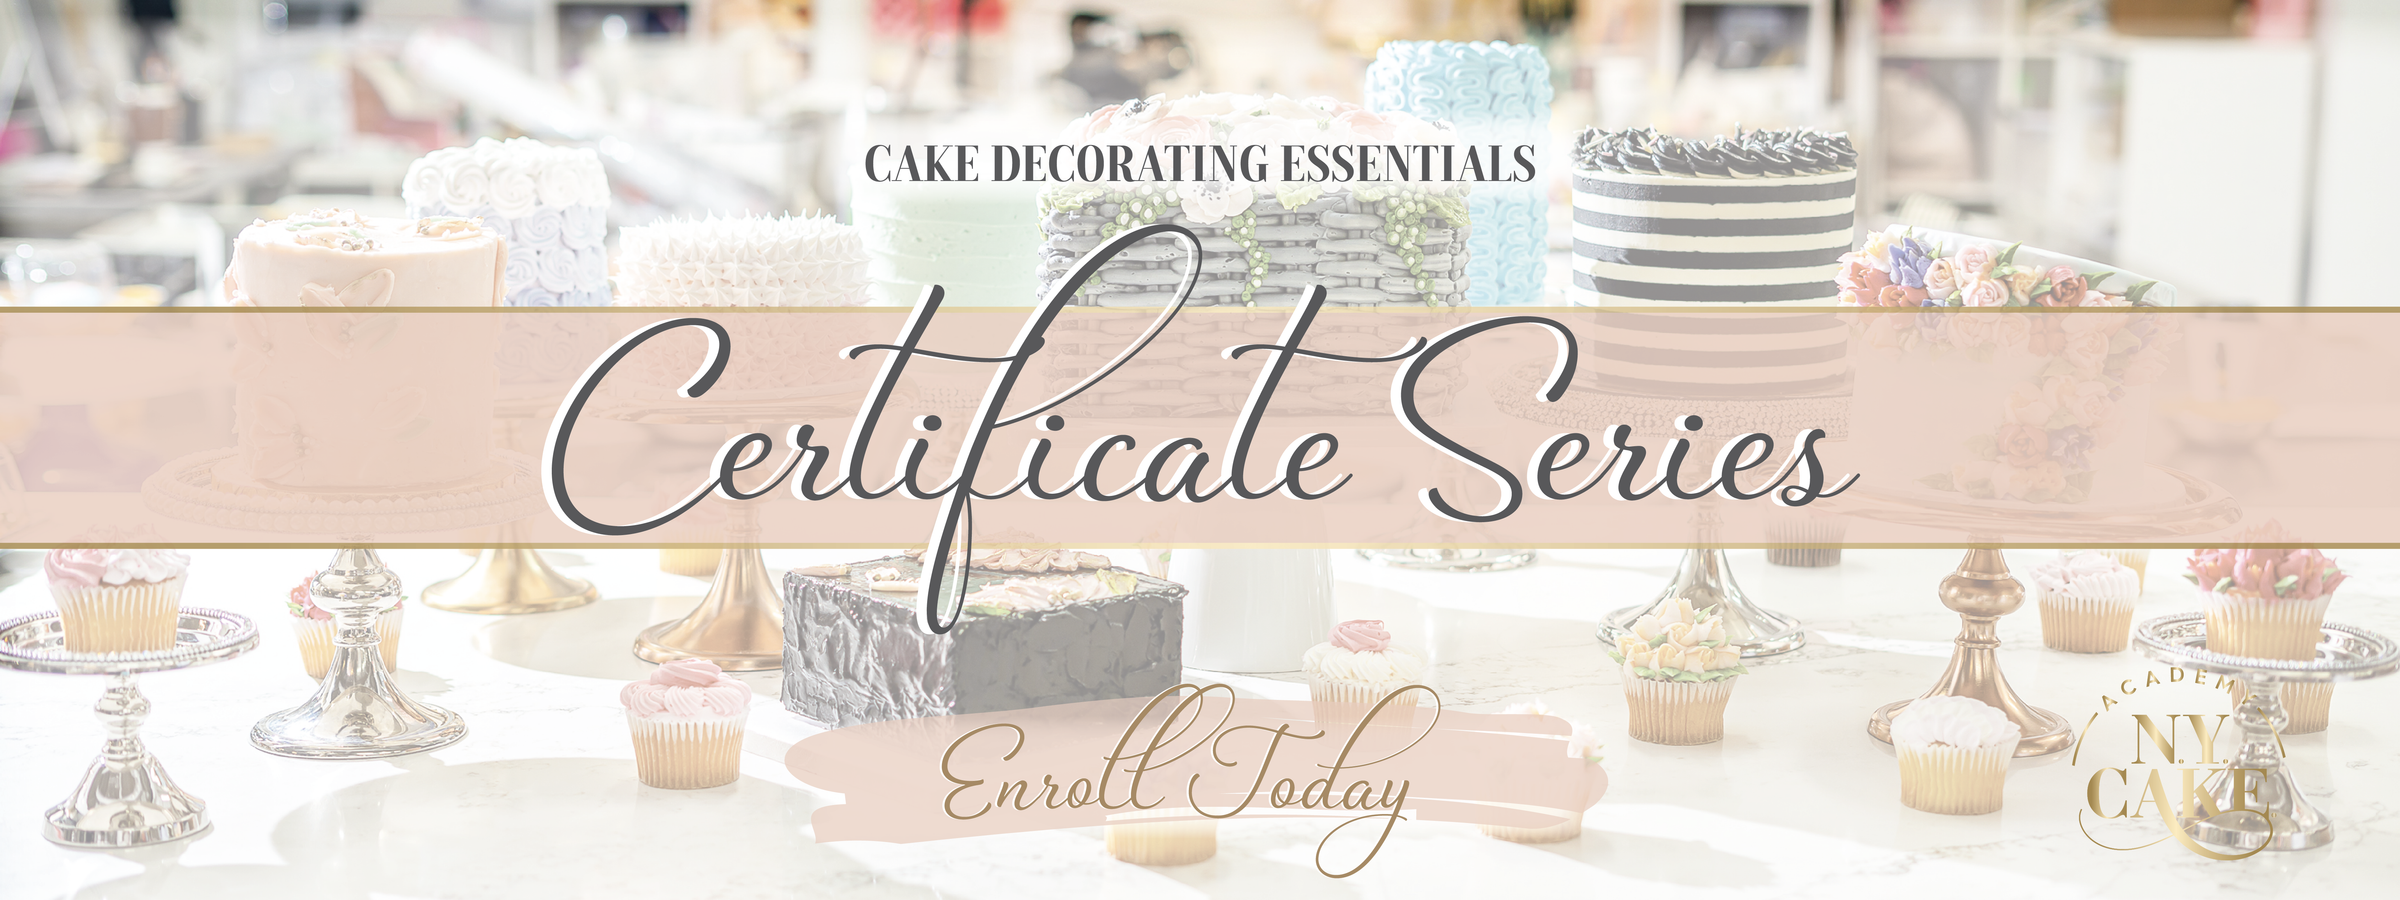 NY Cake Academy | Certificate Series | Cake Decorating Essentials | Master Cake Decorating Today